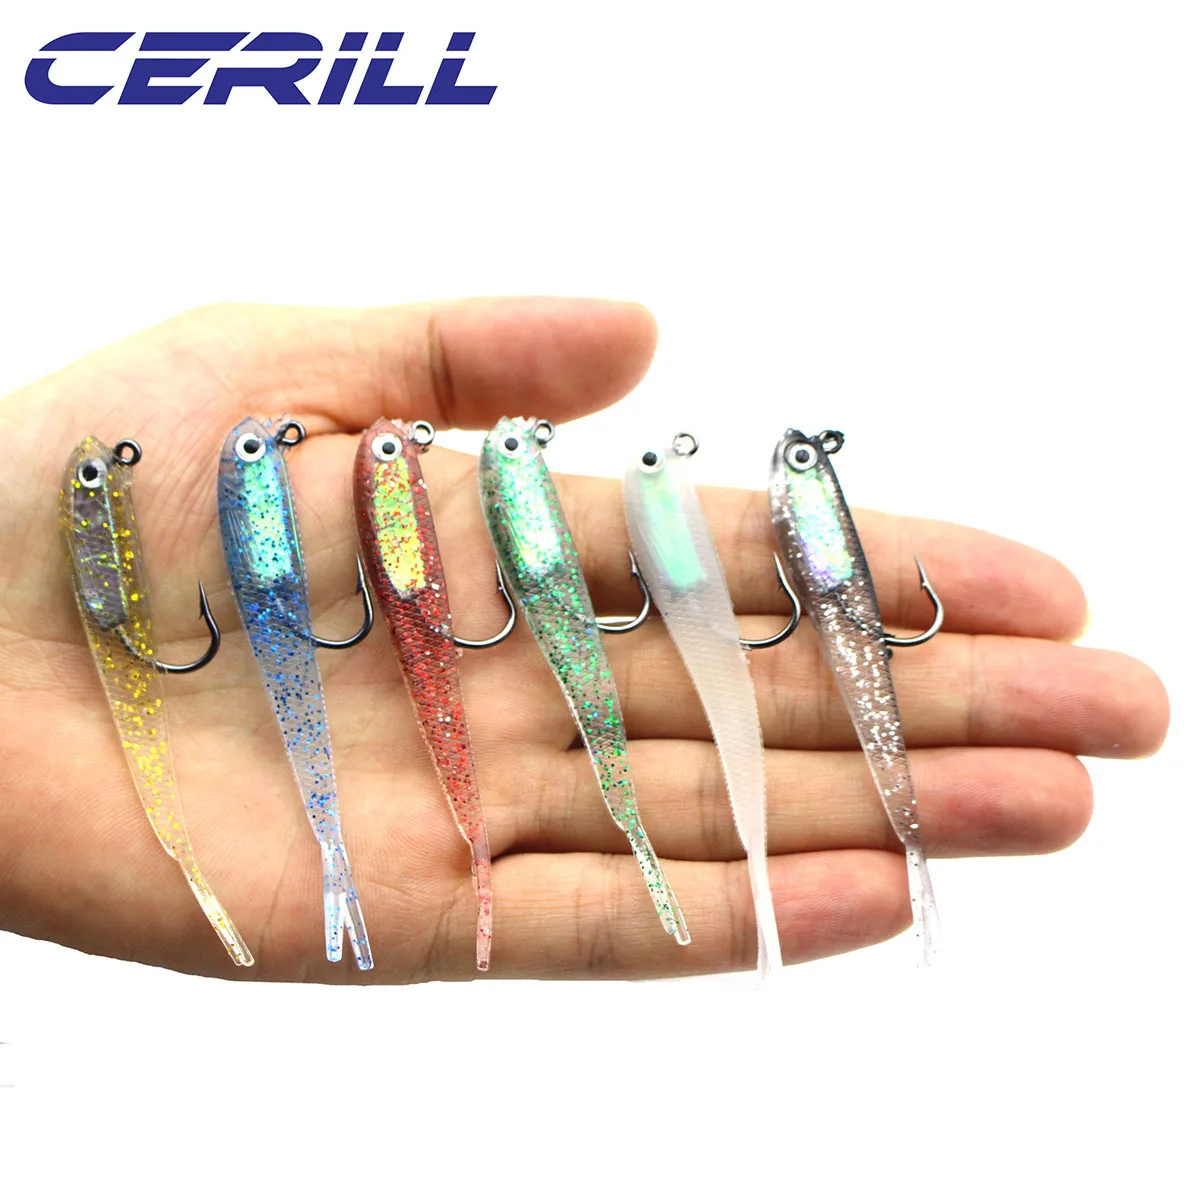 Lot 10 Cerill Fork Tail Jig Head With Hook Soft Fishing Lure Artificial Bait Silicone Wobblers Carp Bass Pike Swimbait Tackle